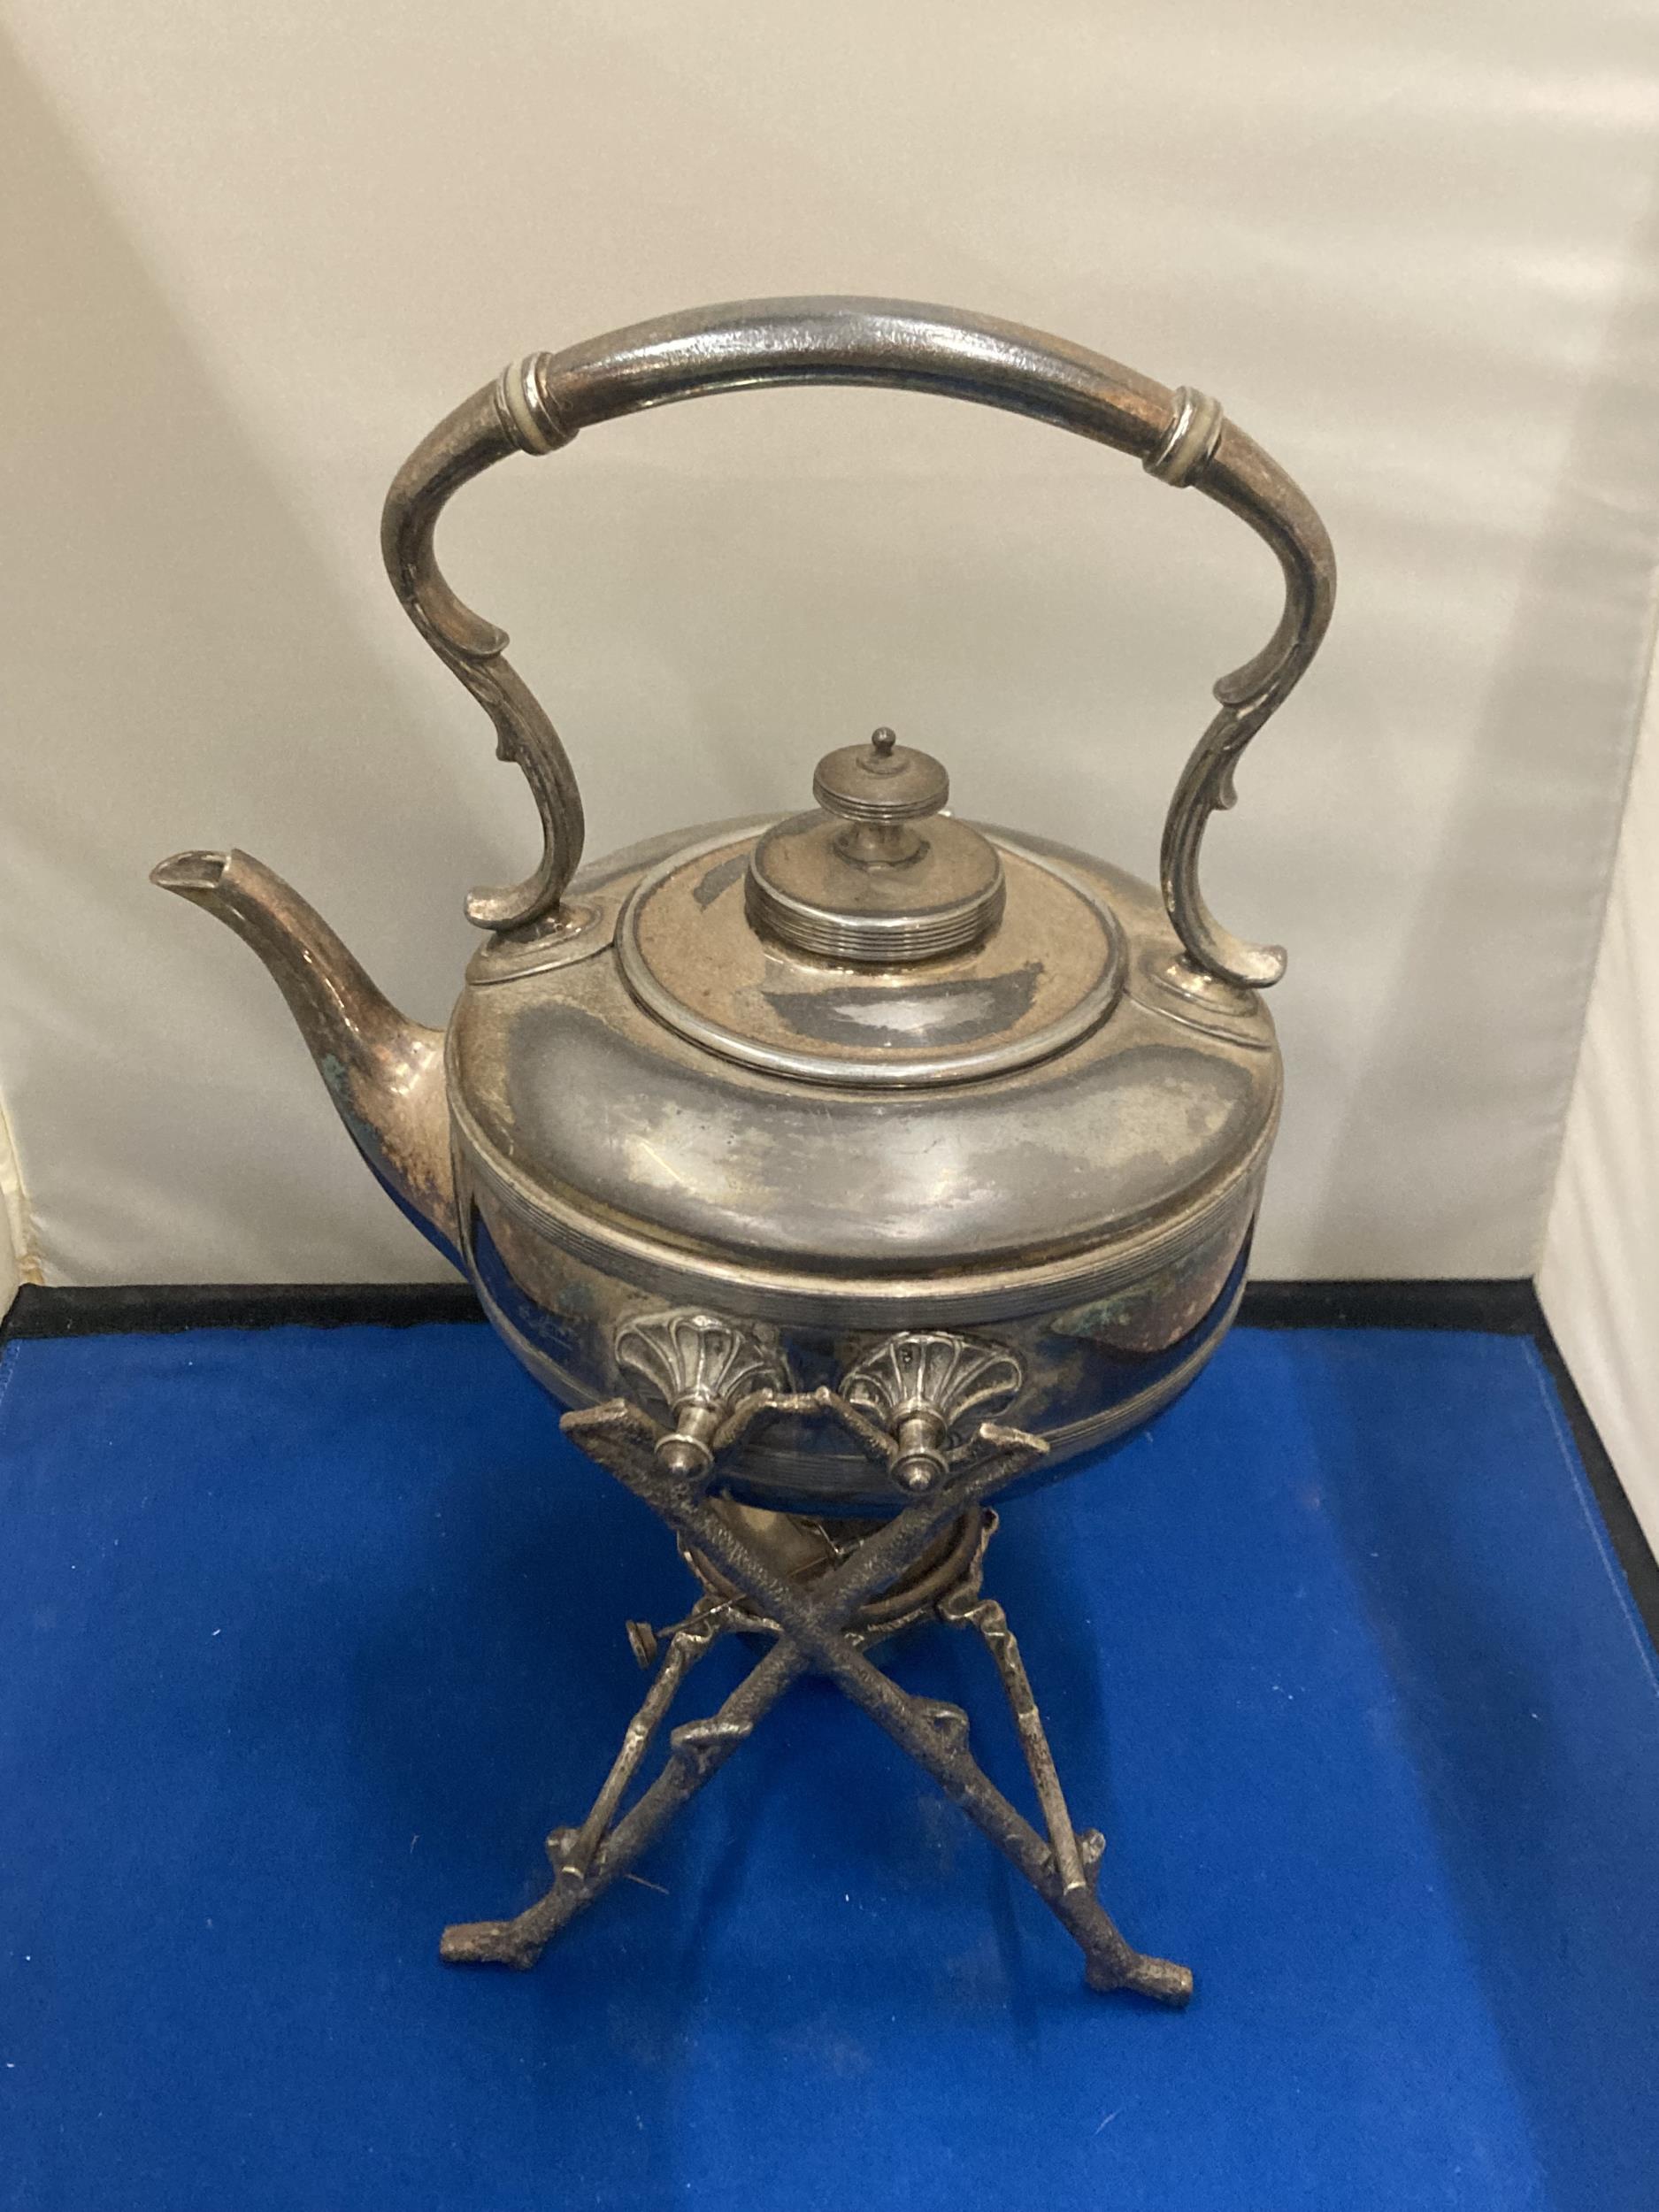 A SILVER PLATED SPIRIT KETTLE WITH FRAME AND BURNER